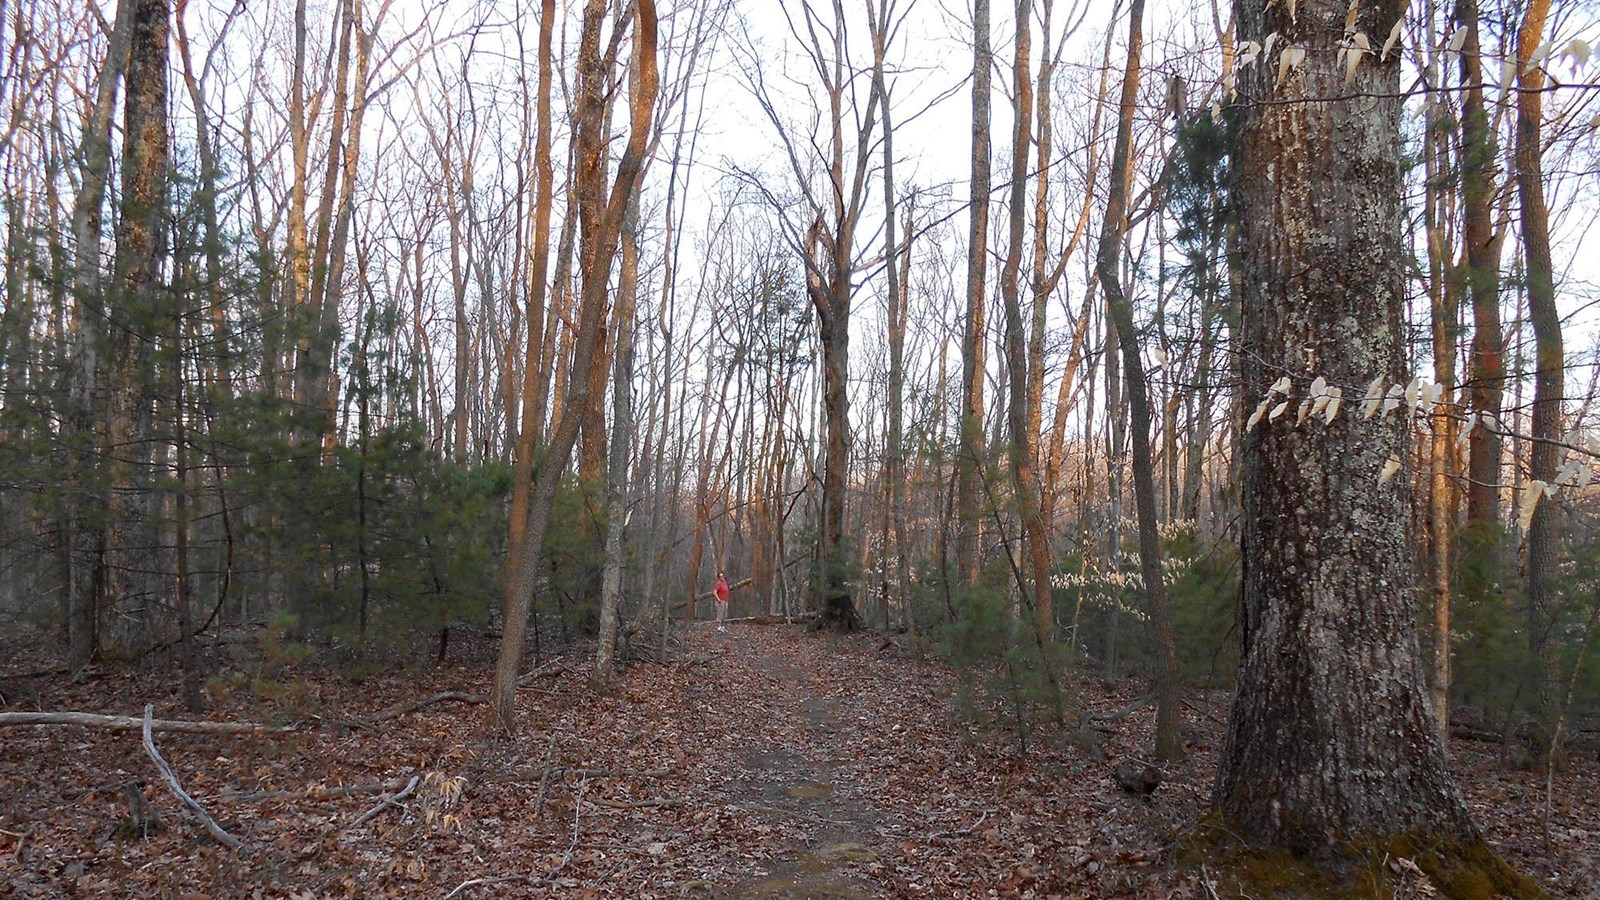 A view through a wooded trail through the forest